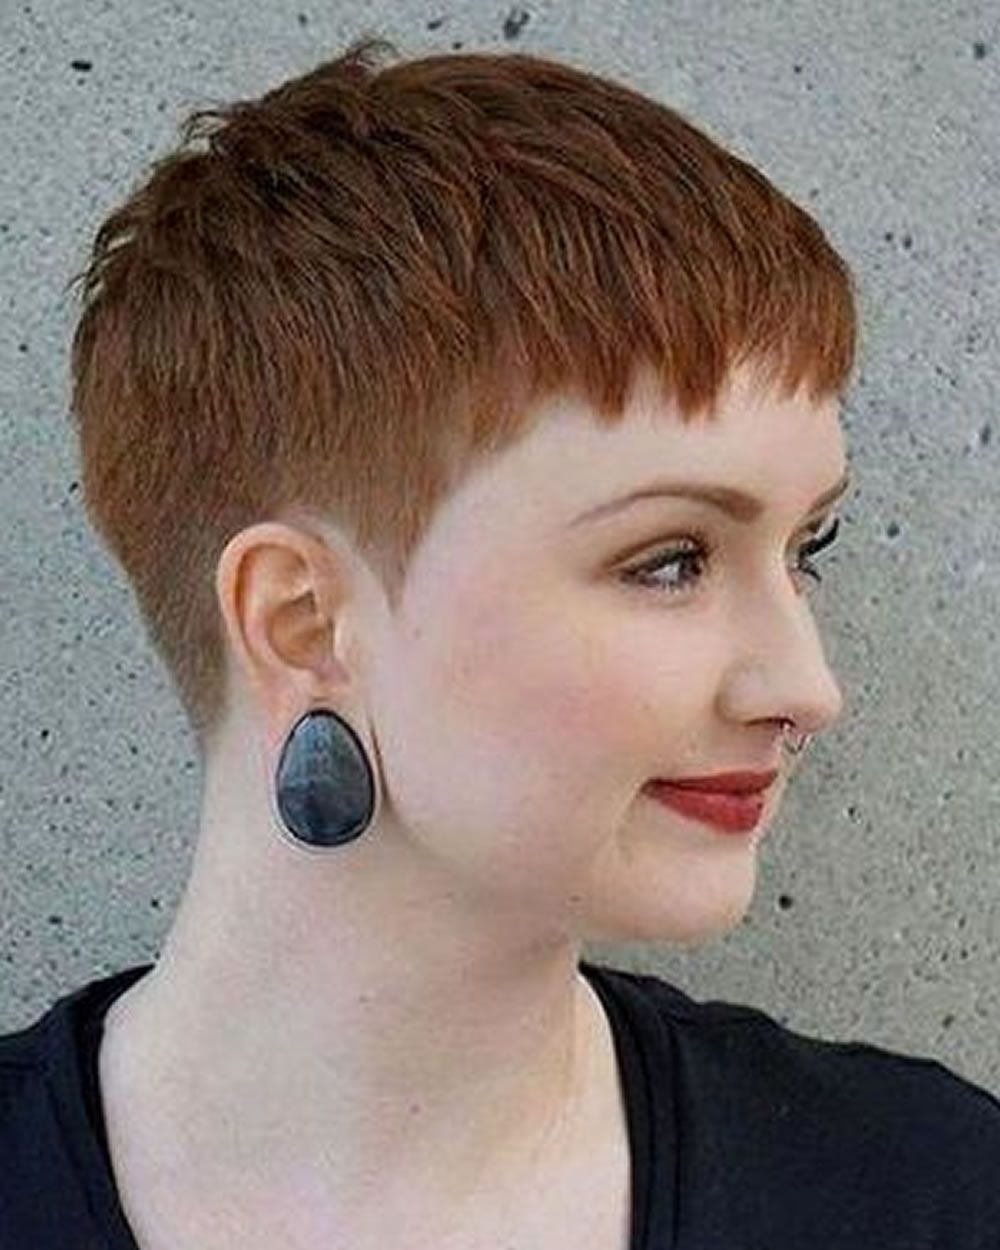 Hairstyles For Round Face And Thin Hair 2018 Within Most Recent Short Pixie Hairstyles For Round Face (View 5 of 15)